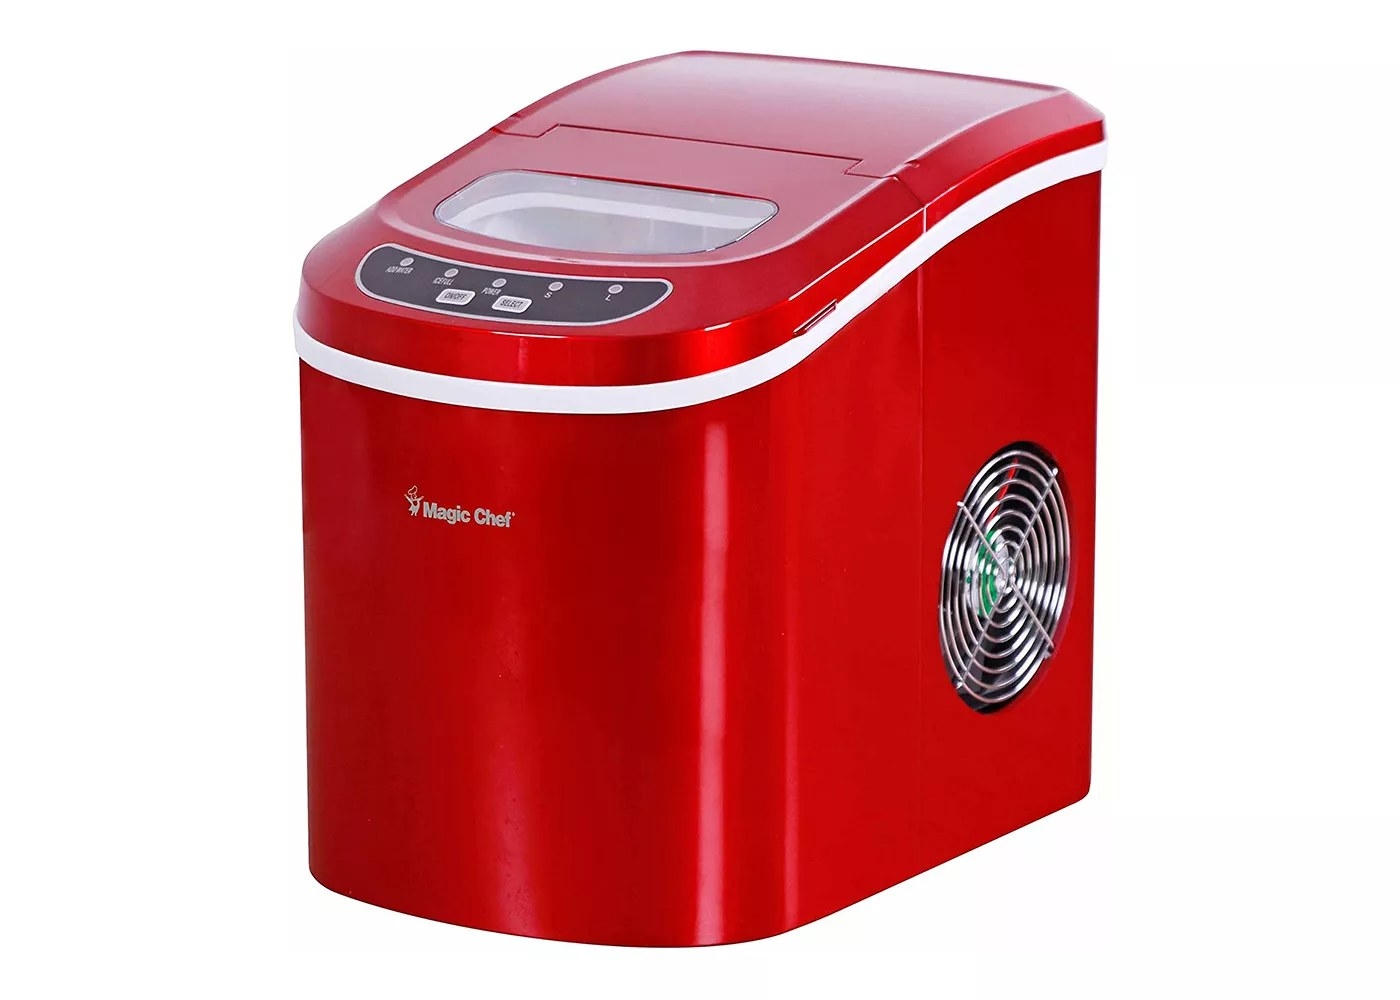 The red Magic Chef ice maker